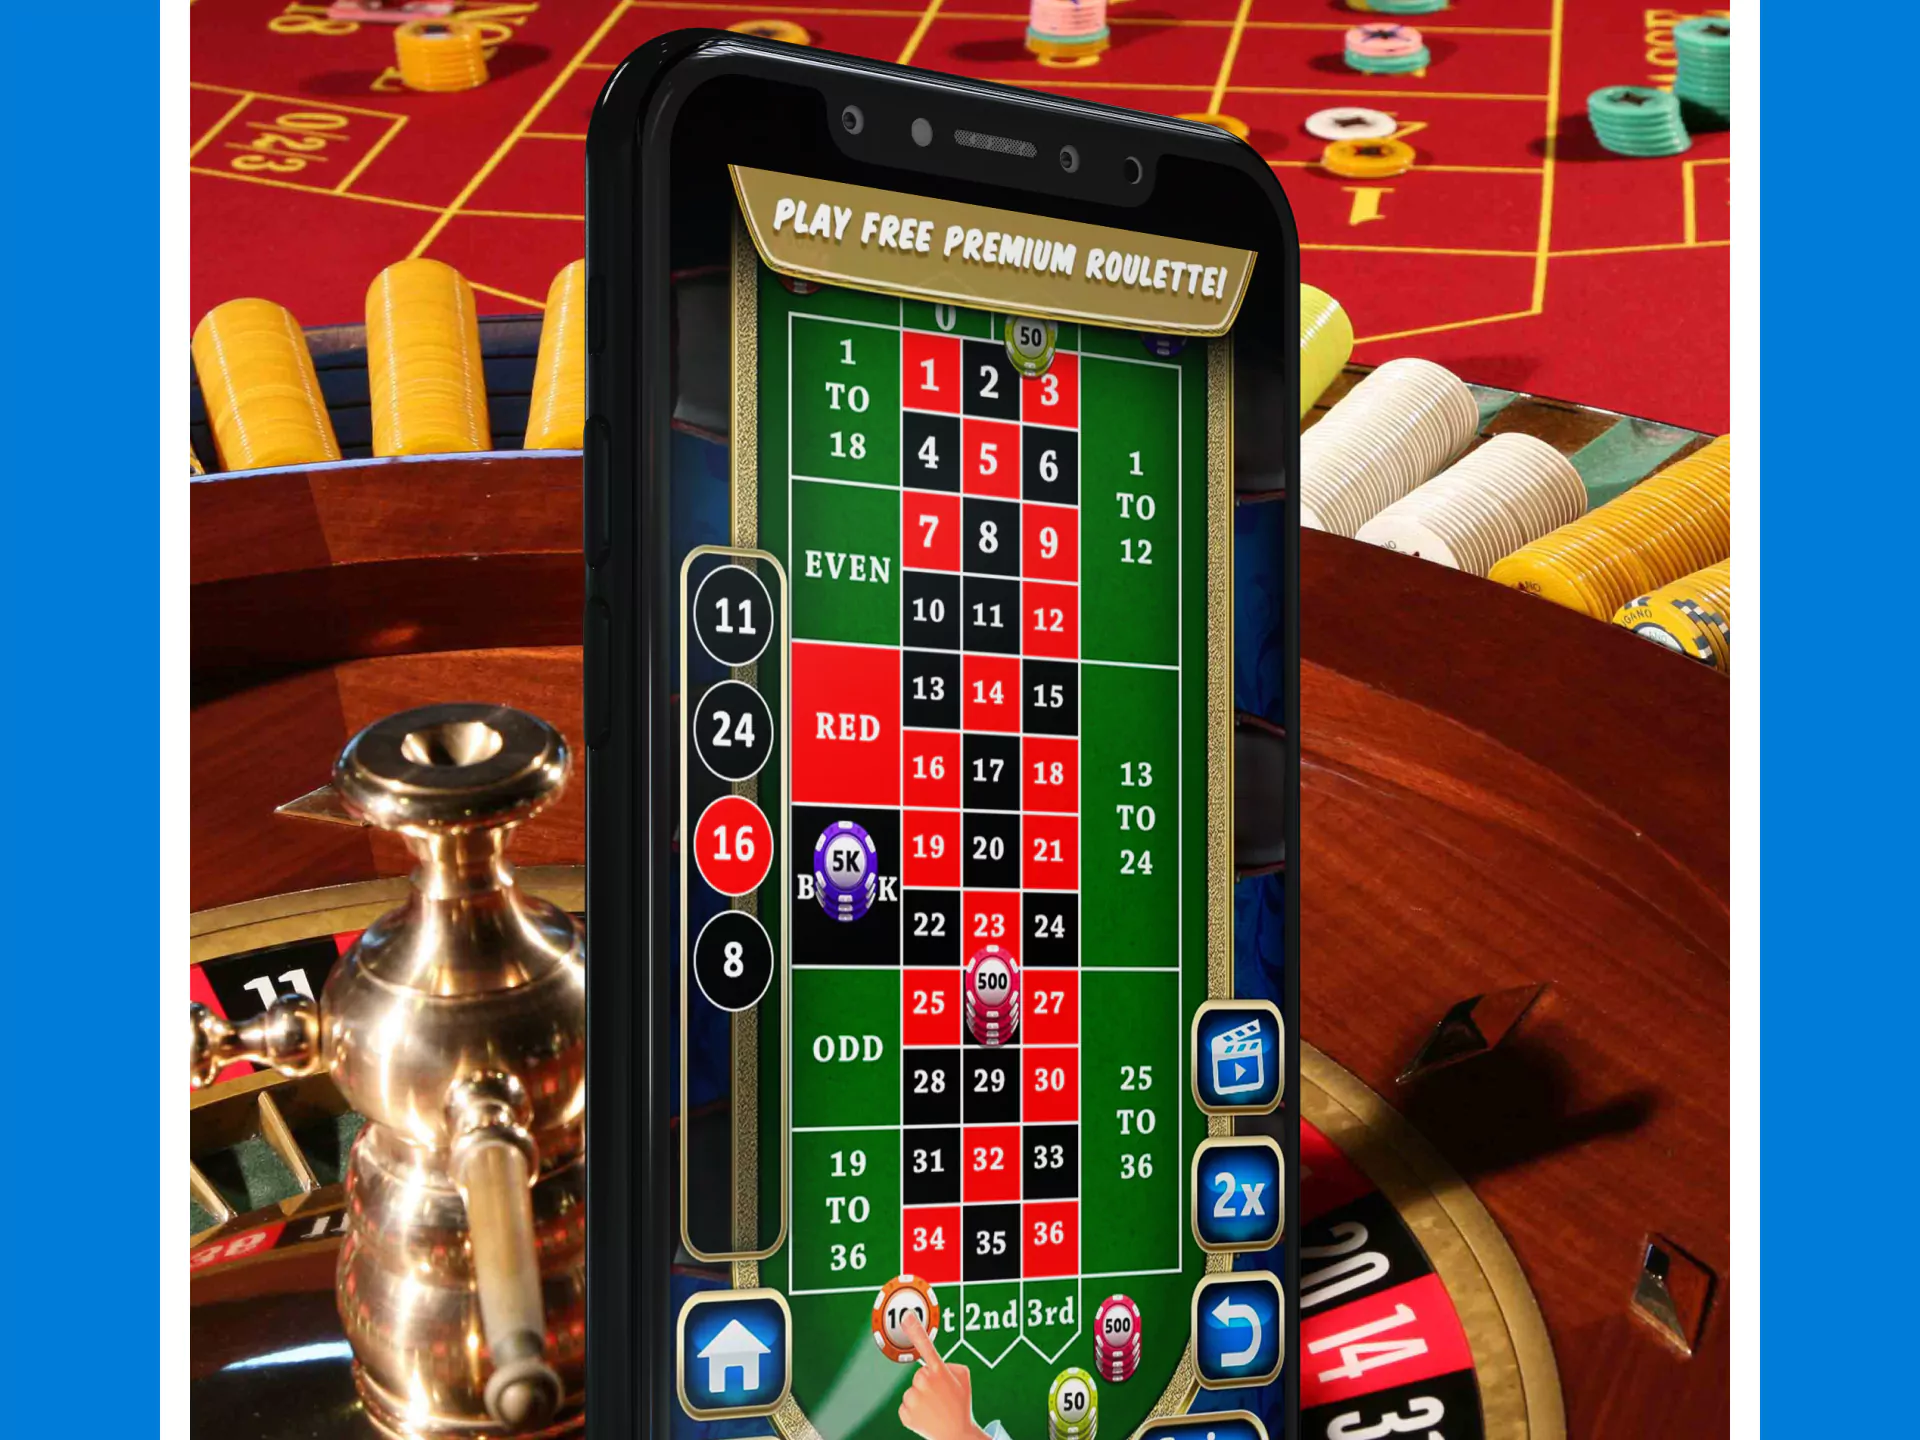 Use your smartphone to play Crickex roulette.